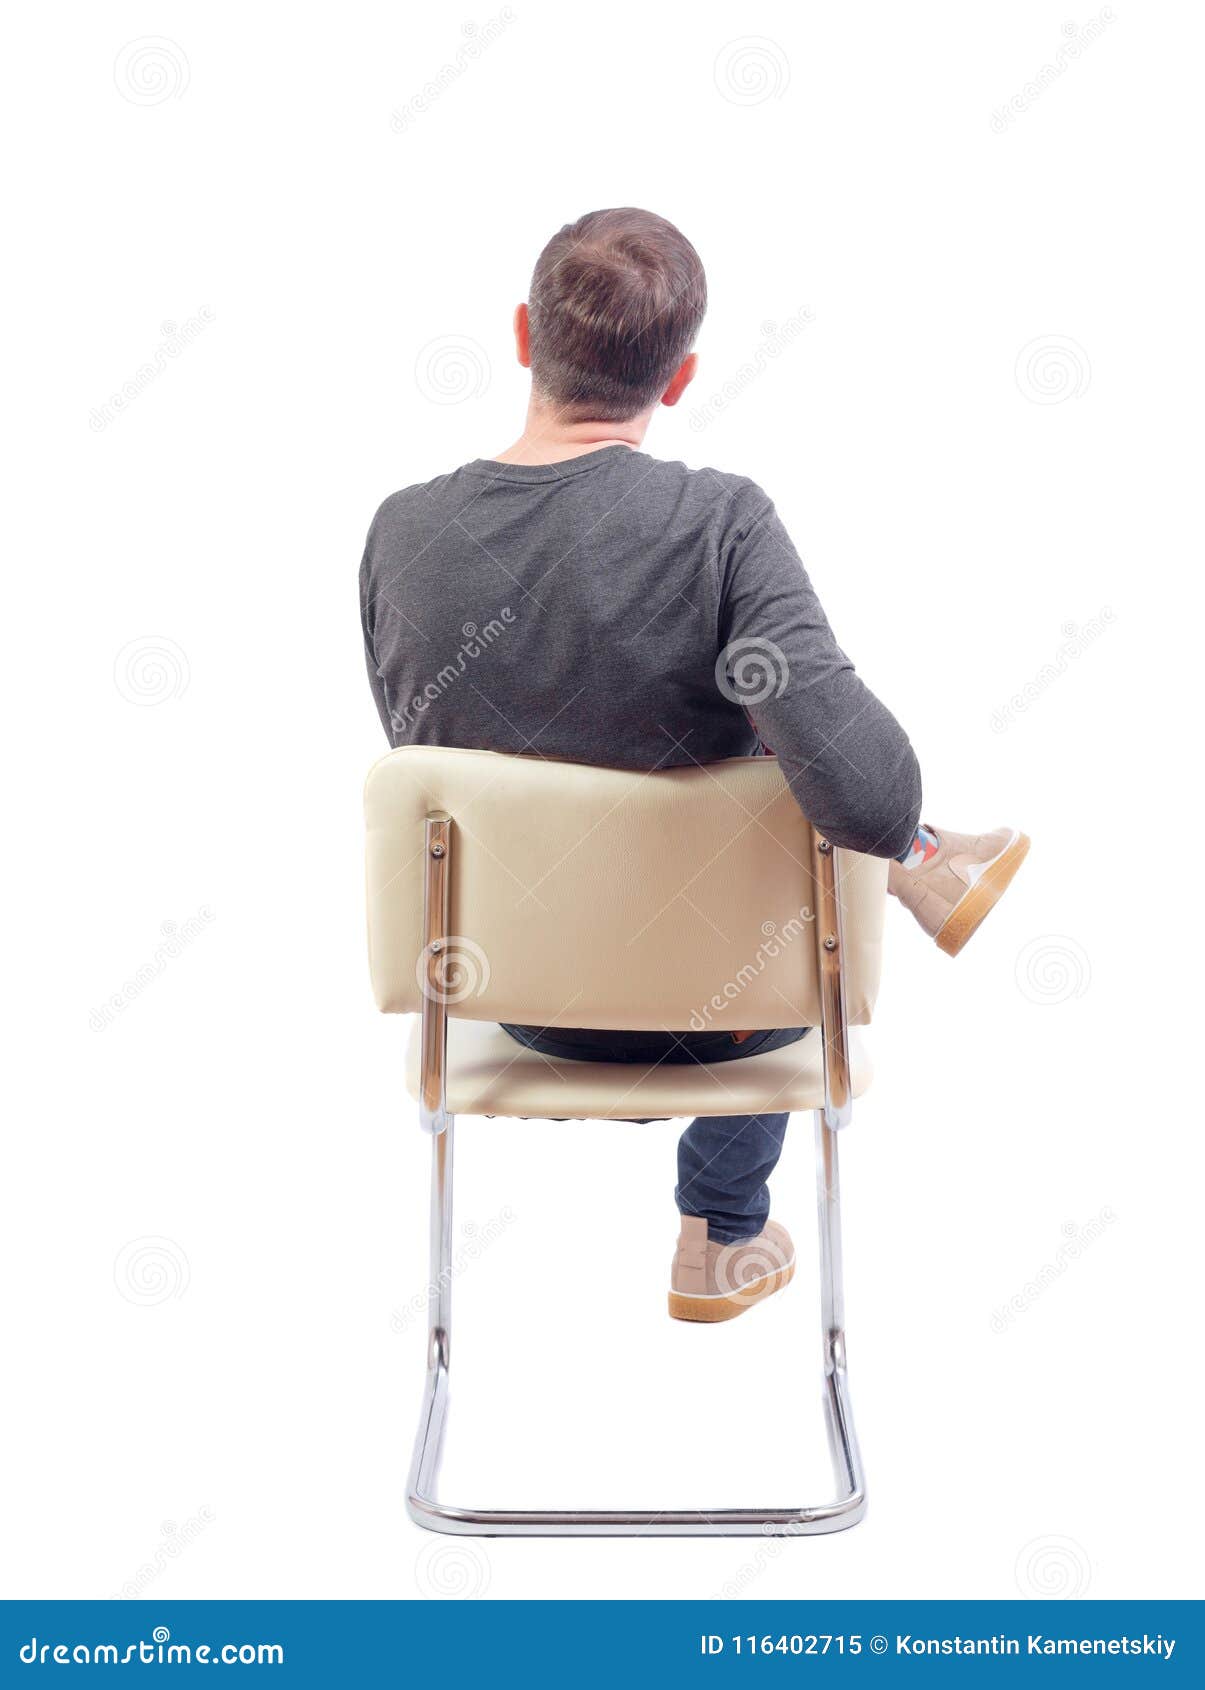 Back View of a Man Sitting on a Chair. Stock Image - Image of student,  casual: 116402715